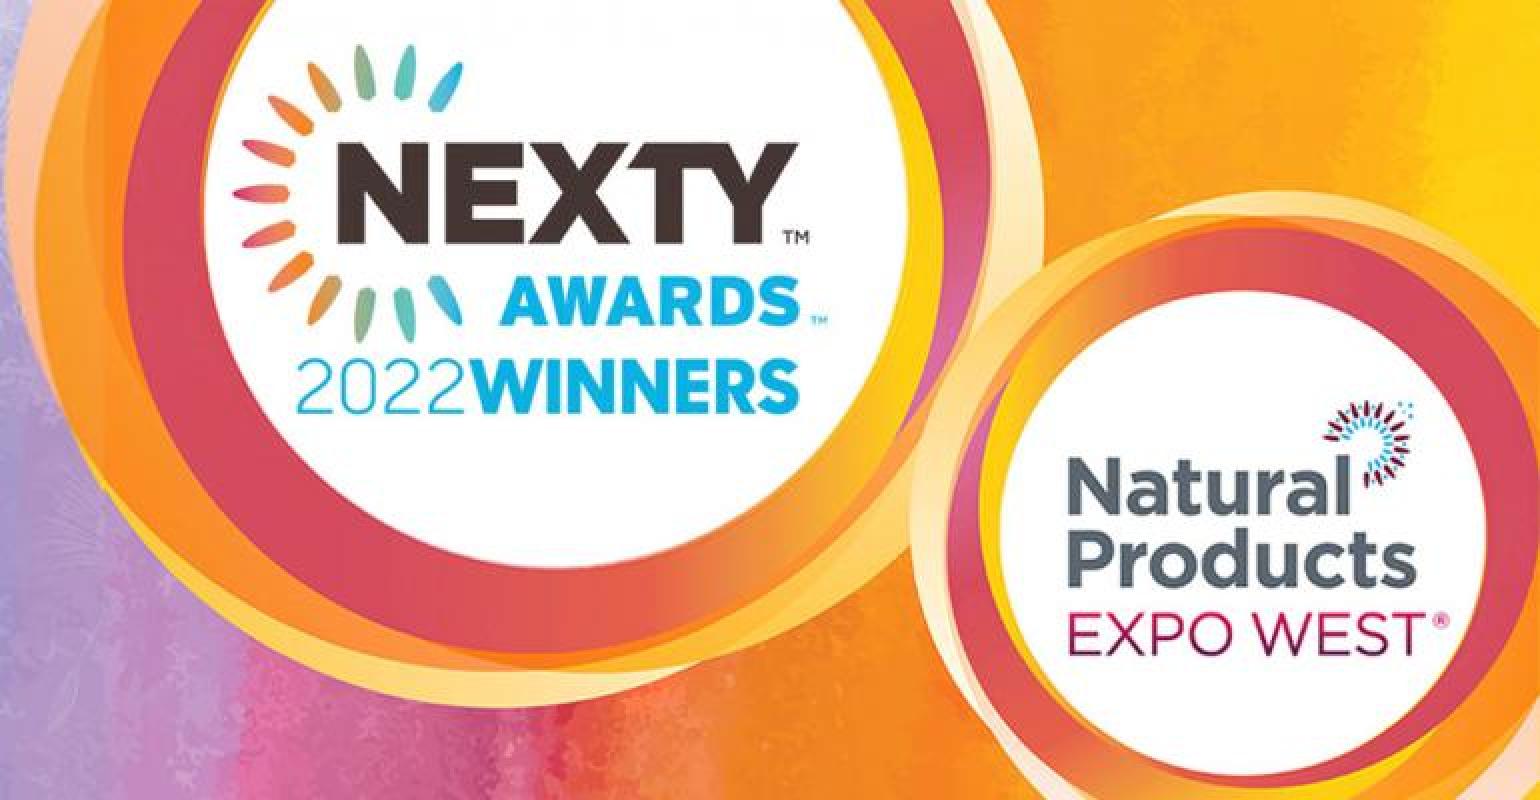 Natural Products Expo West 2022 names NEXTY Awards winners